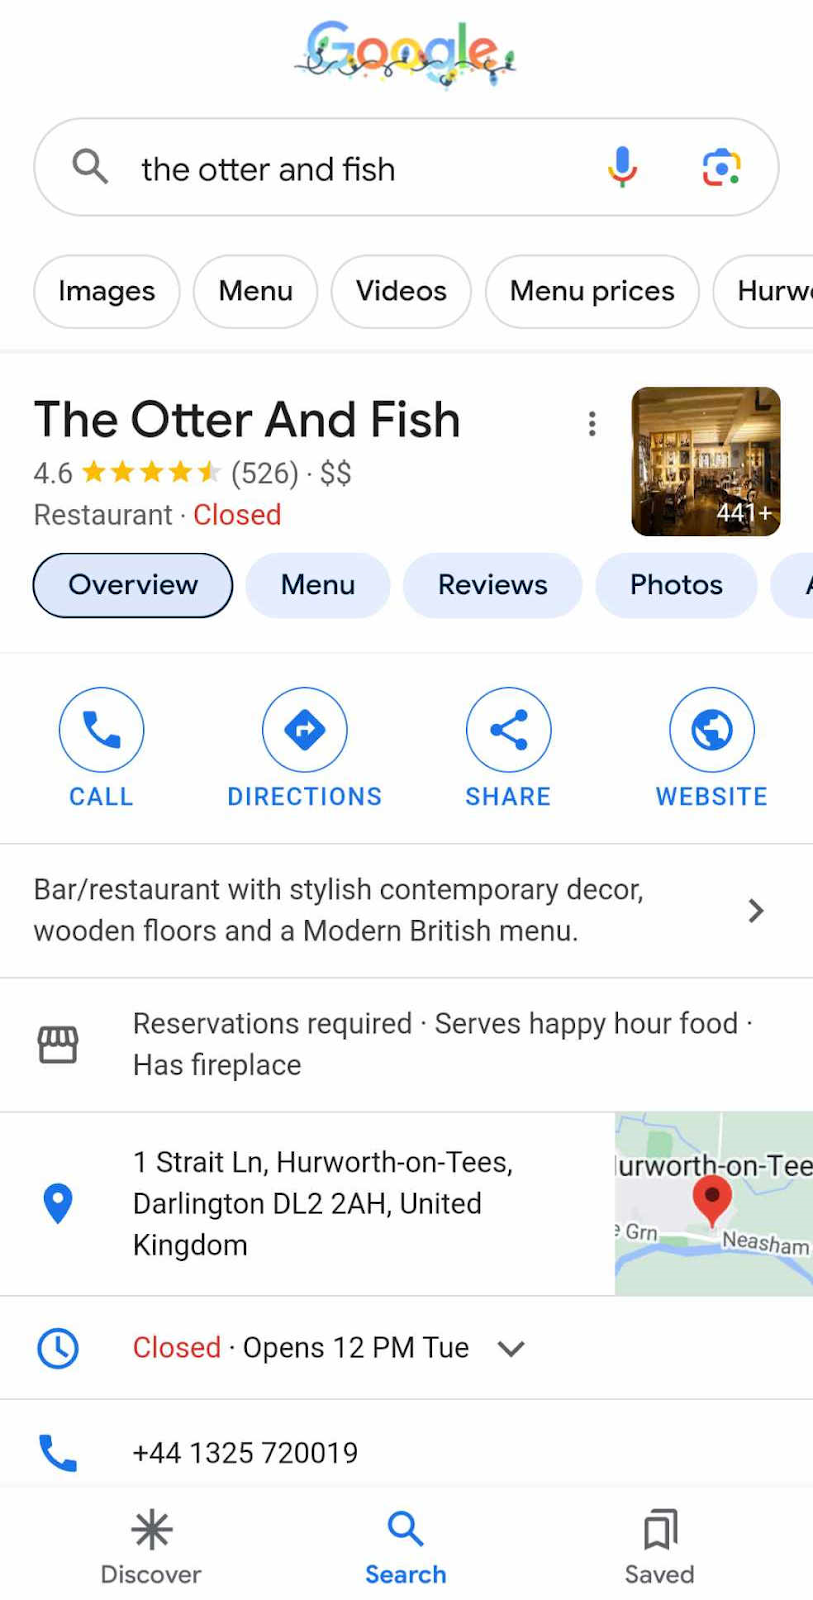 Google Business Profile for "The Otter And Fish" on mobile SERP